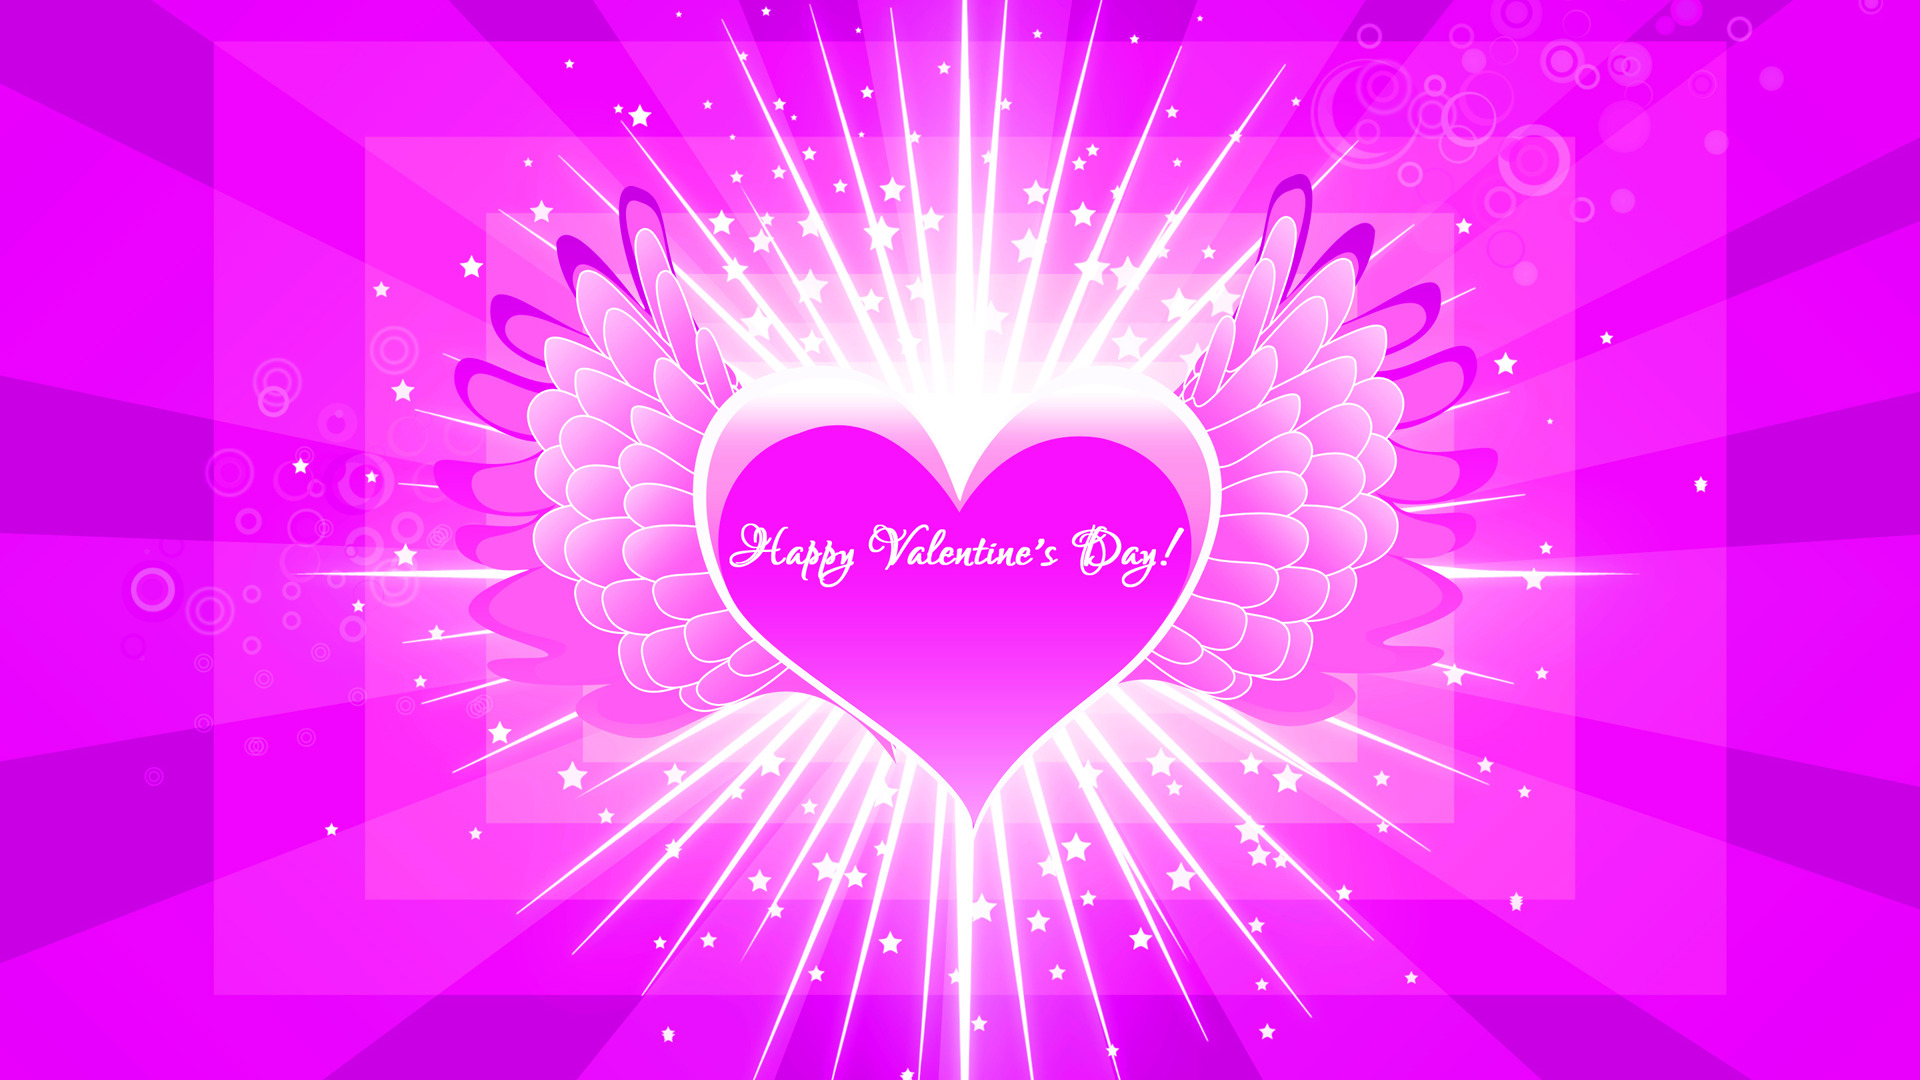 Happy Valentine’s Day HD Wallpaper Images